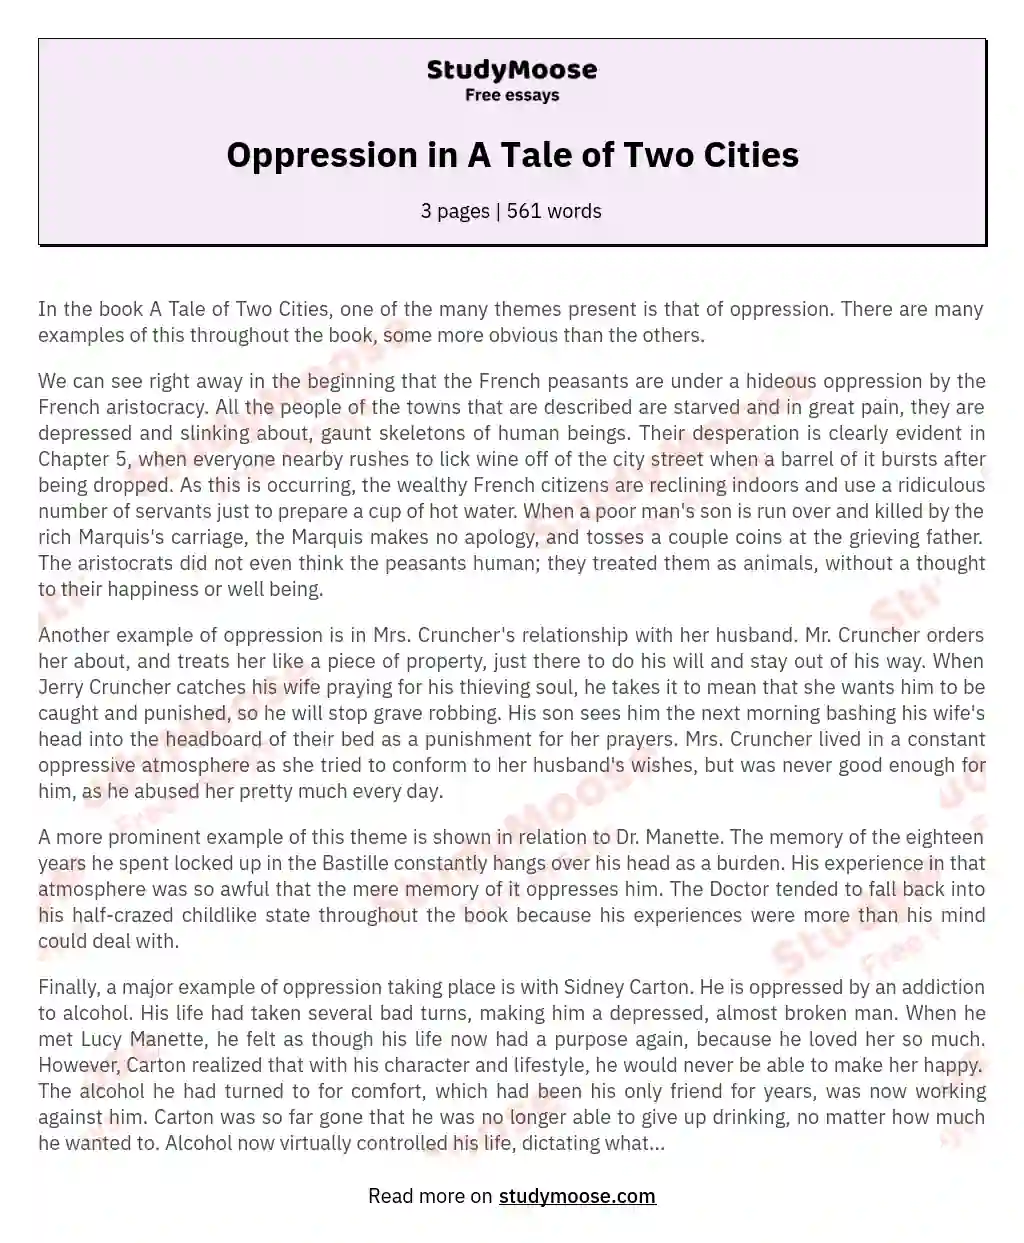 Oppression in A Tale of Two Cities